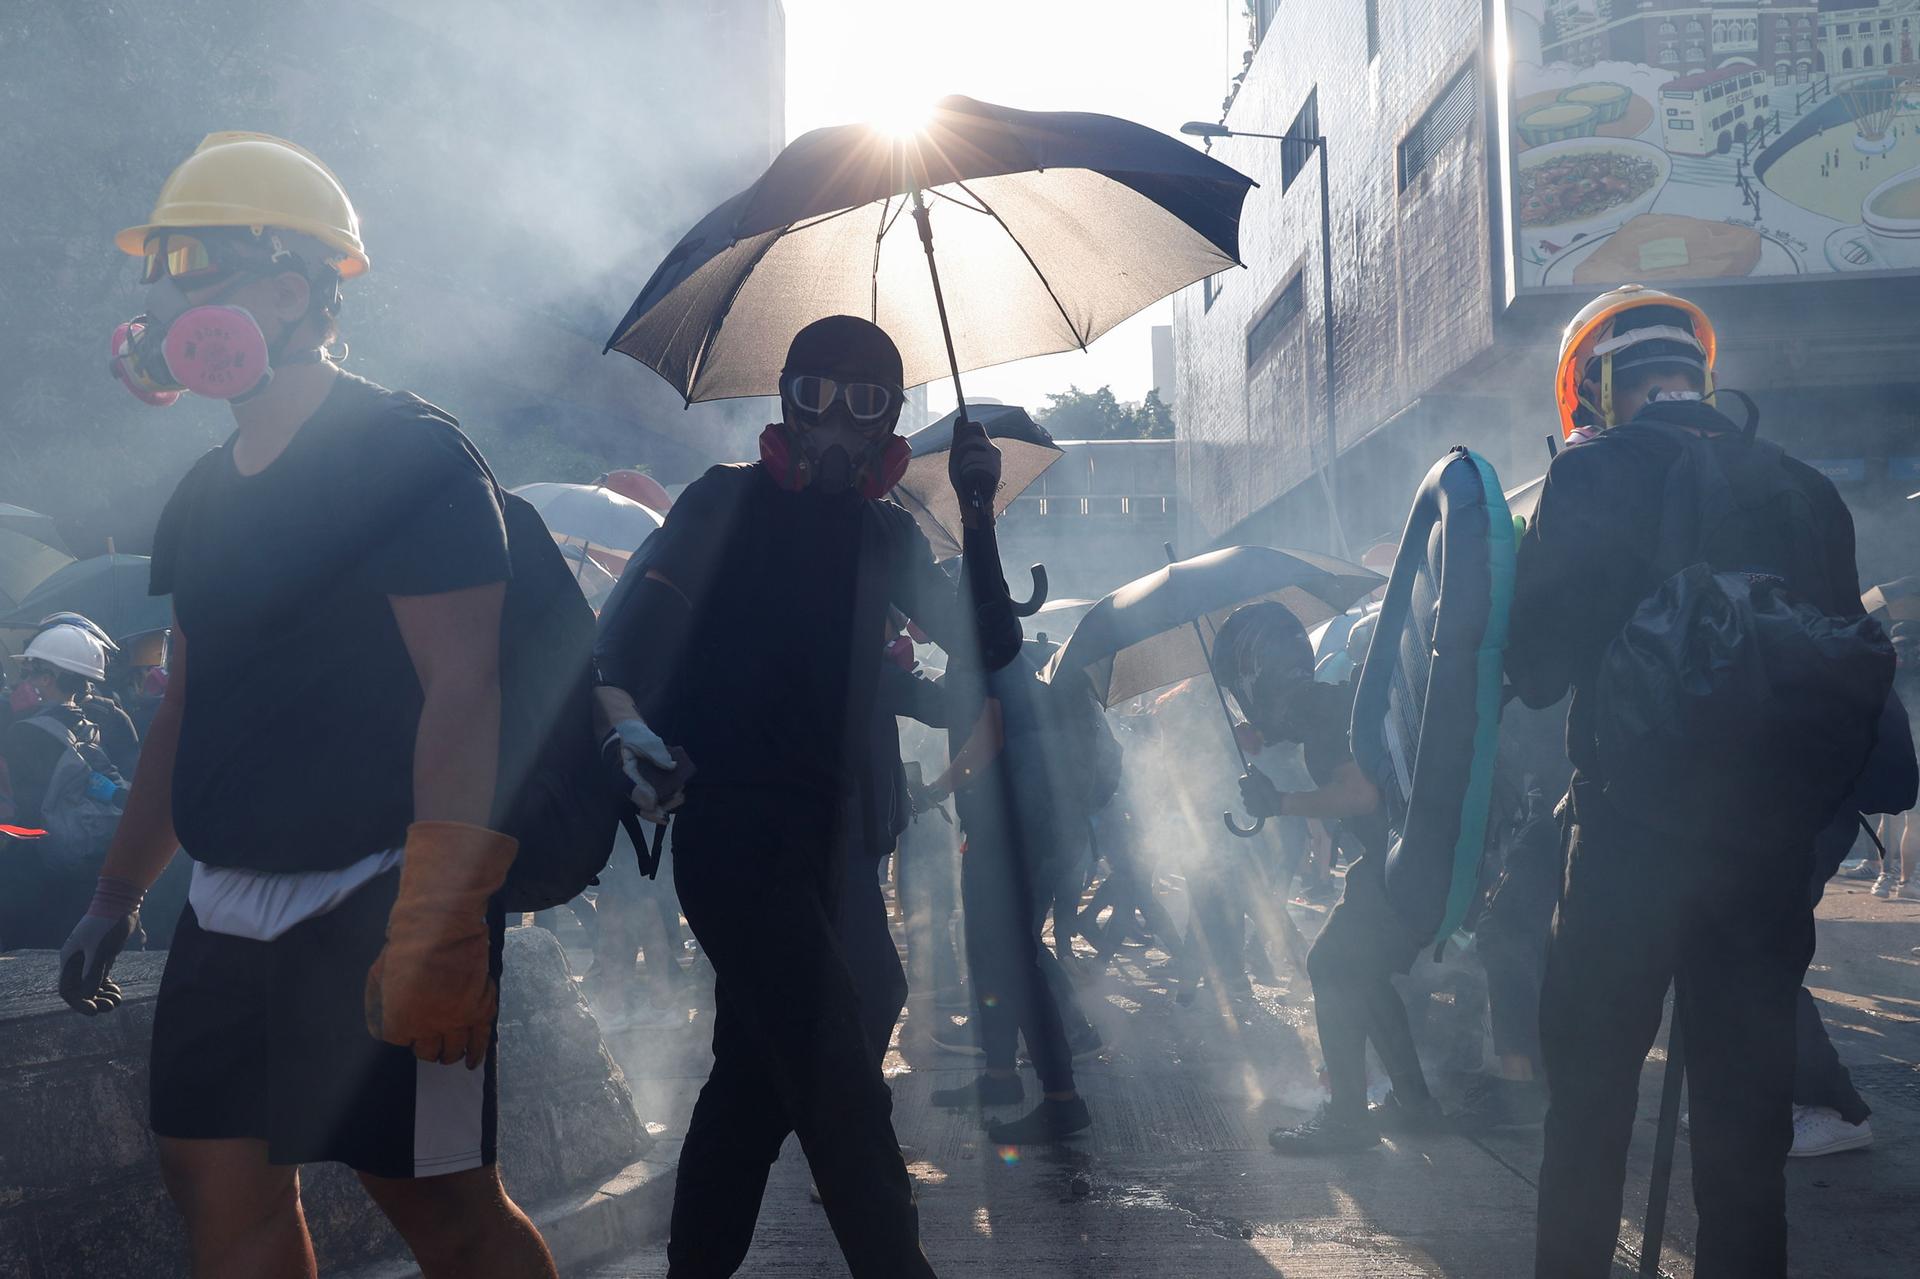 Several protesters are shown wearing gas masks and one holding an umbrella with the sun glaring above it.